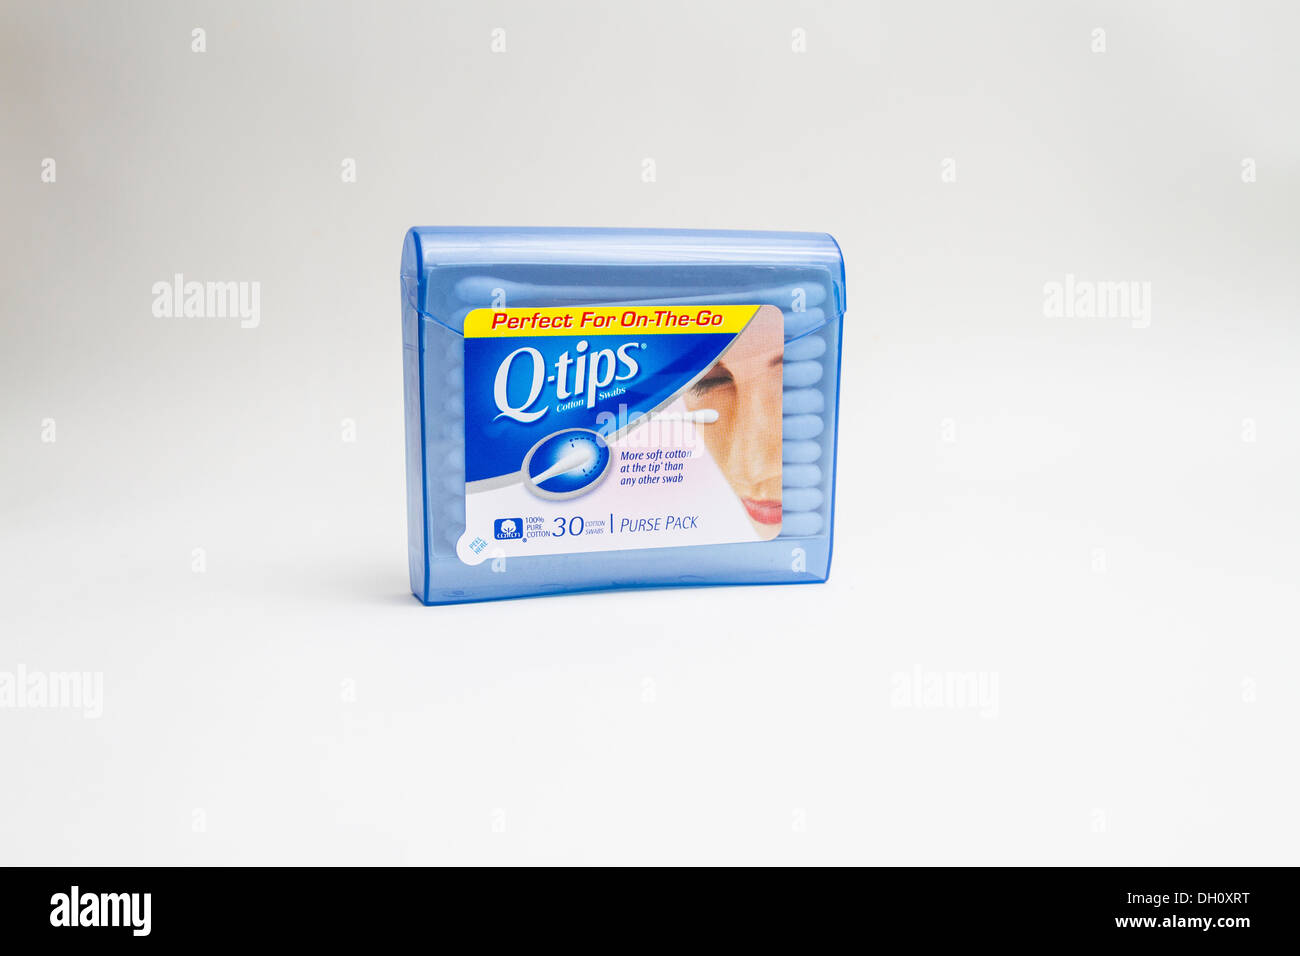 Q-Tips Cotton Swabs Purse Travel Size Pack, 30 Count by Q-Tips